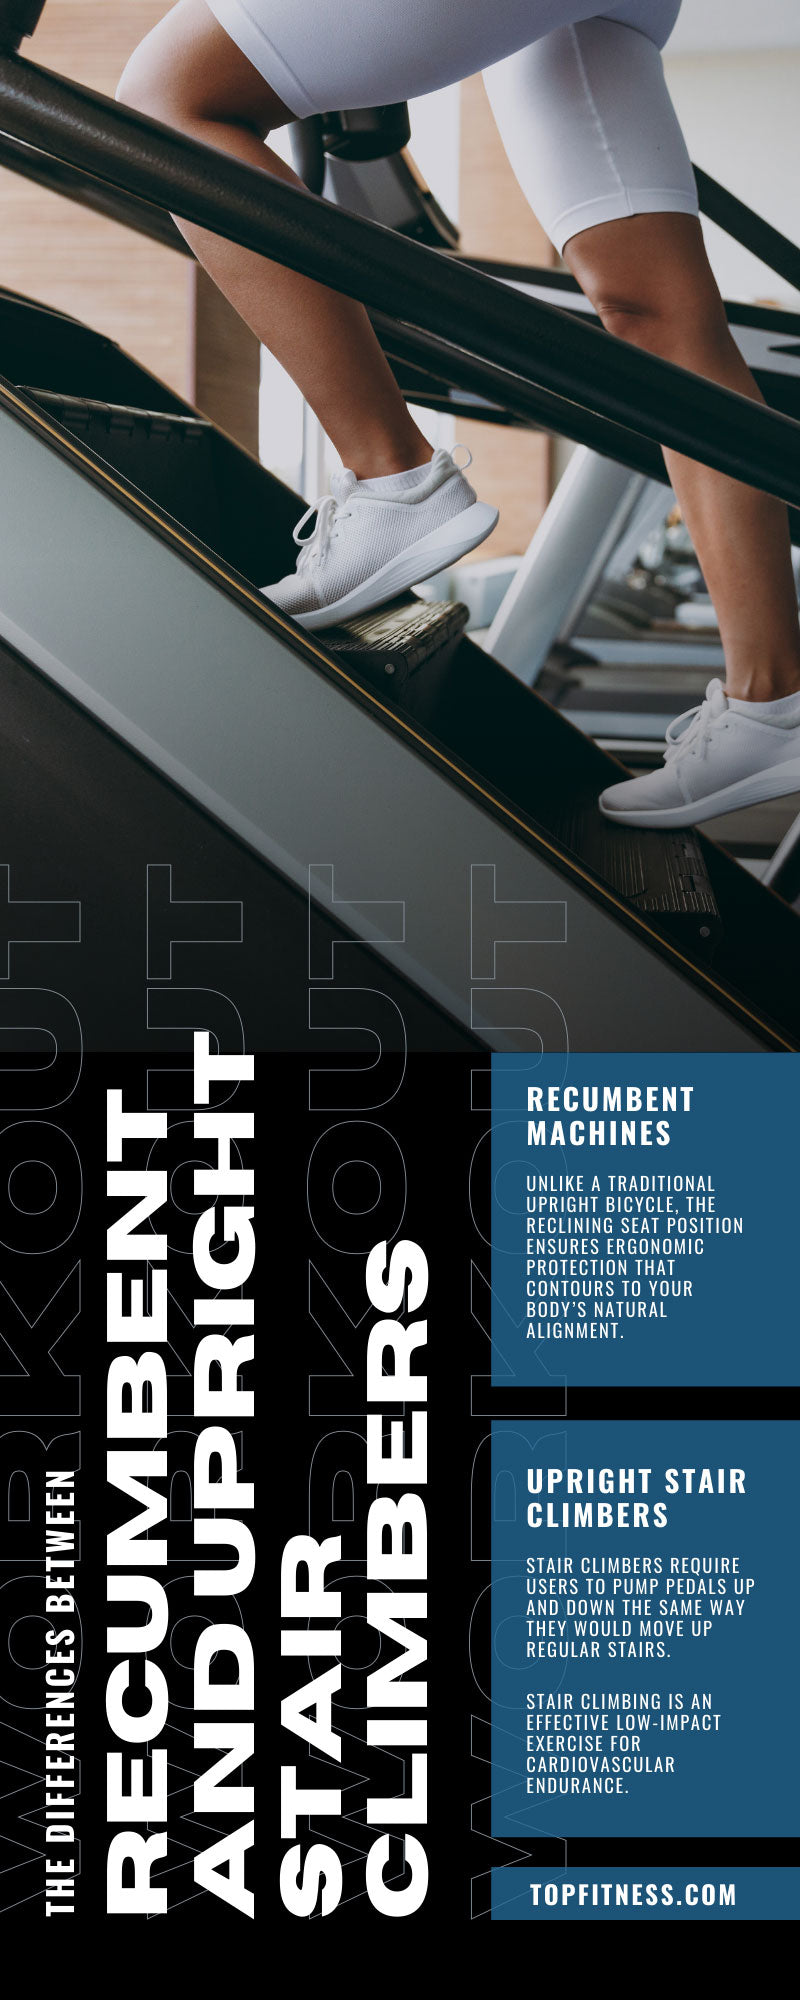 The Differences Between Recumbent and Upright Stair Climbers